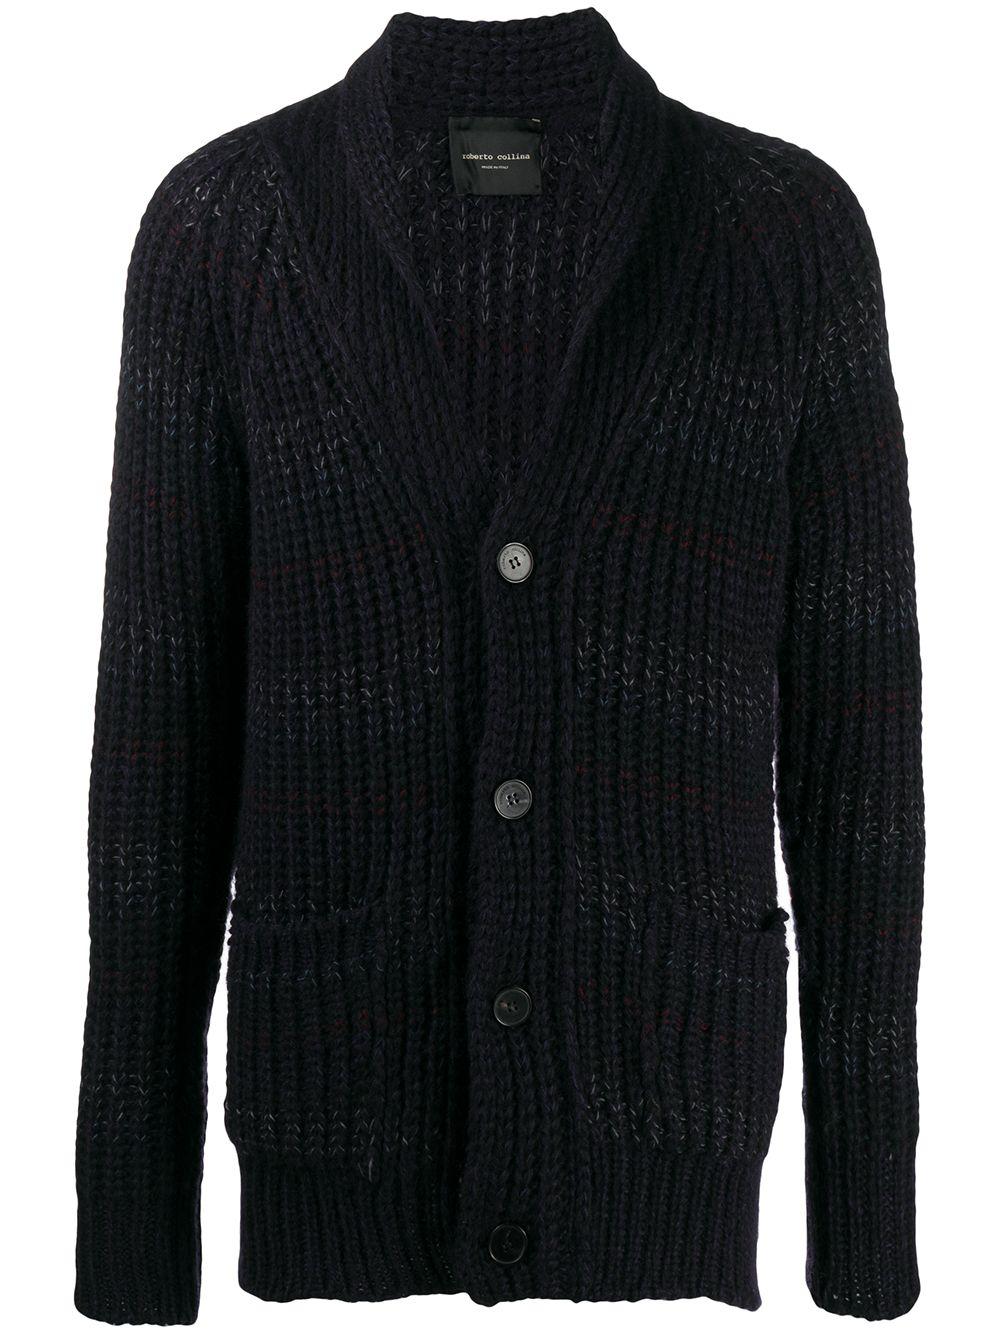 Roberto Collina Wool Ribbed-knit Stripe Cardigan in Blue for Men - Lyst